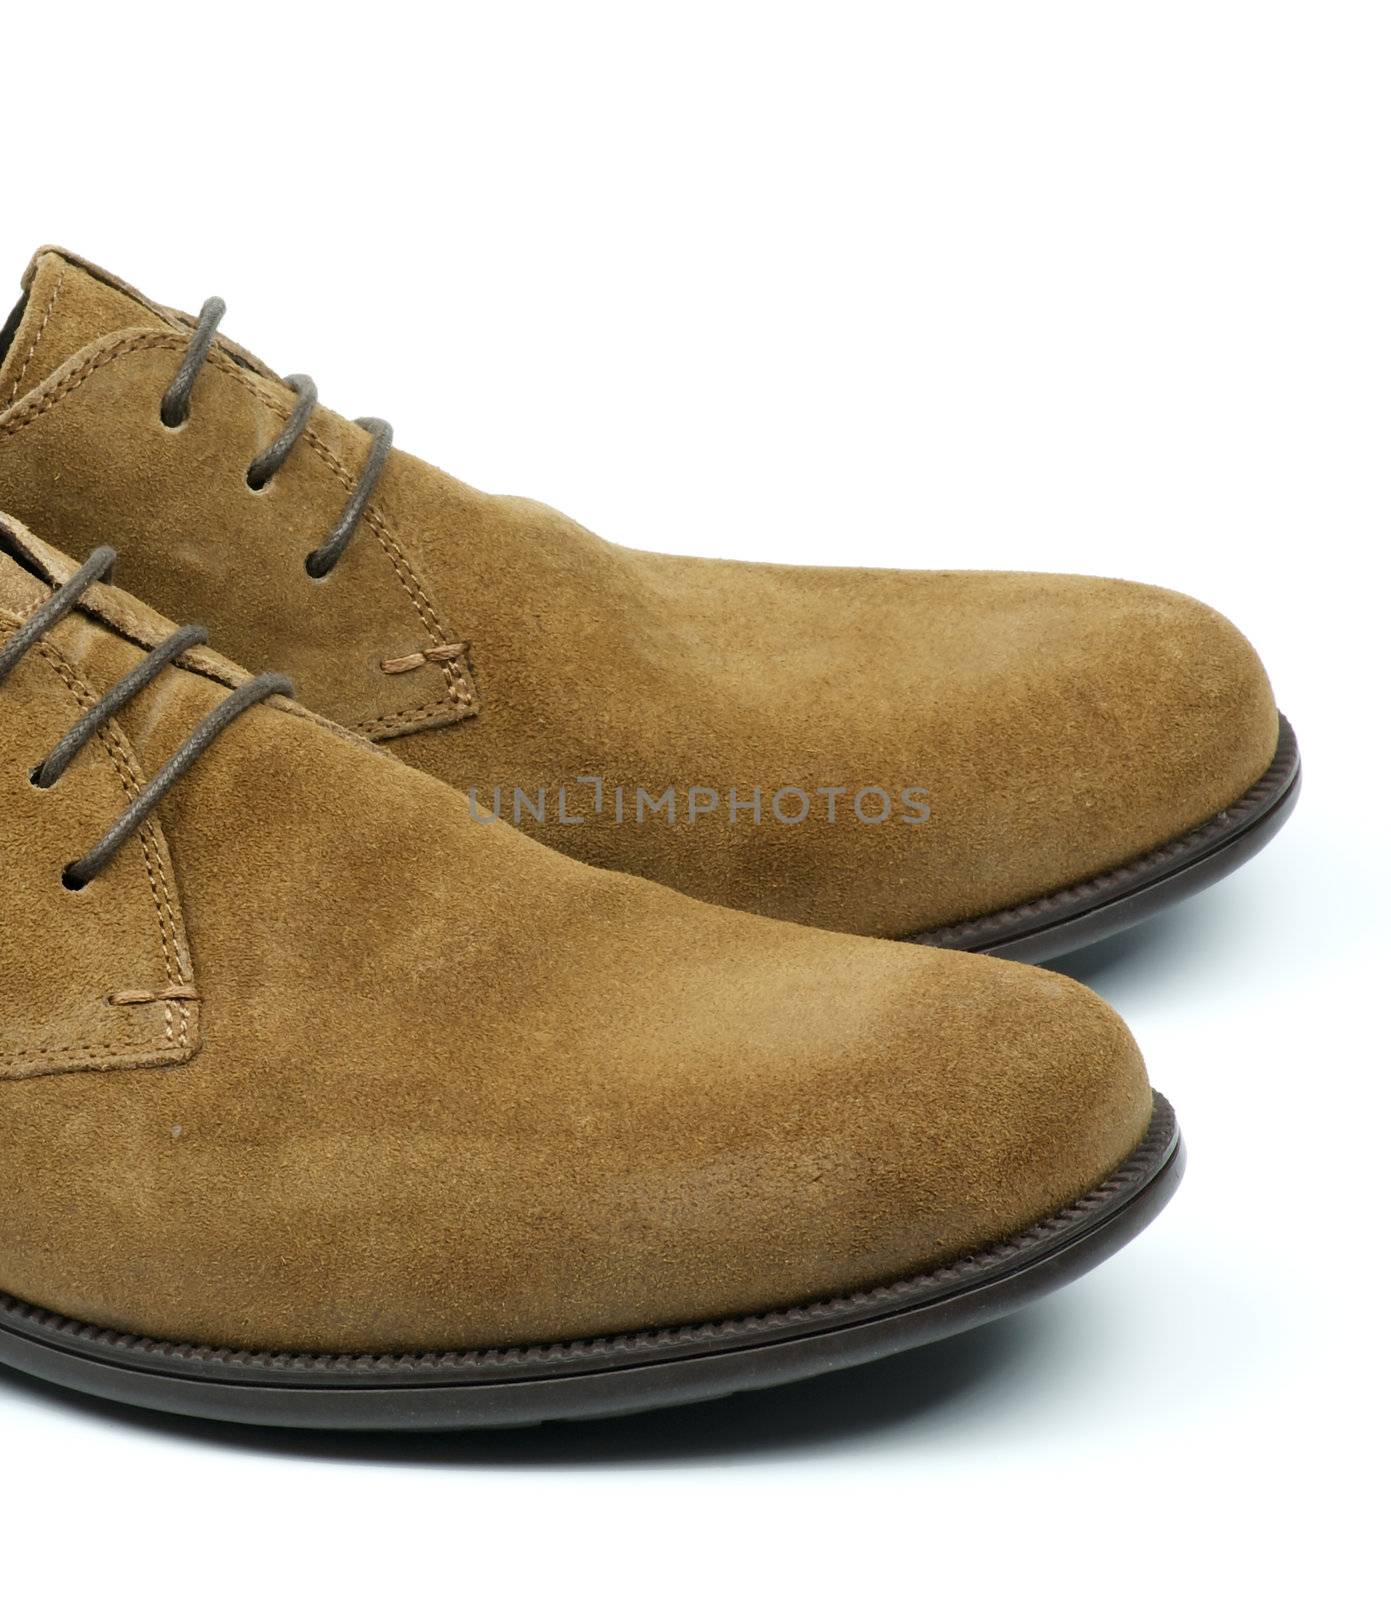 Part of Men's Beige Chamois Leather Shoes closeup on white background